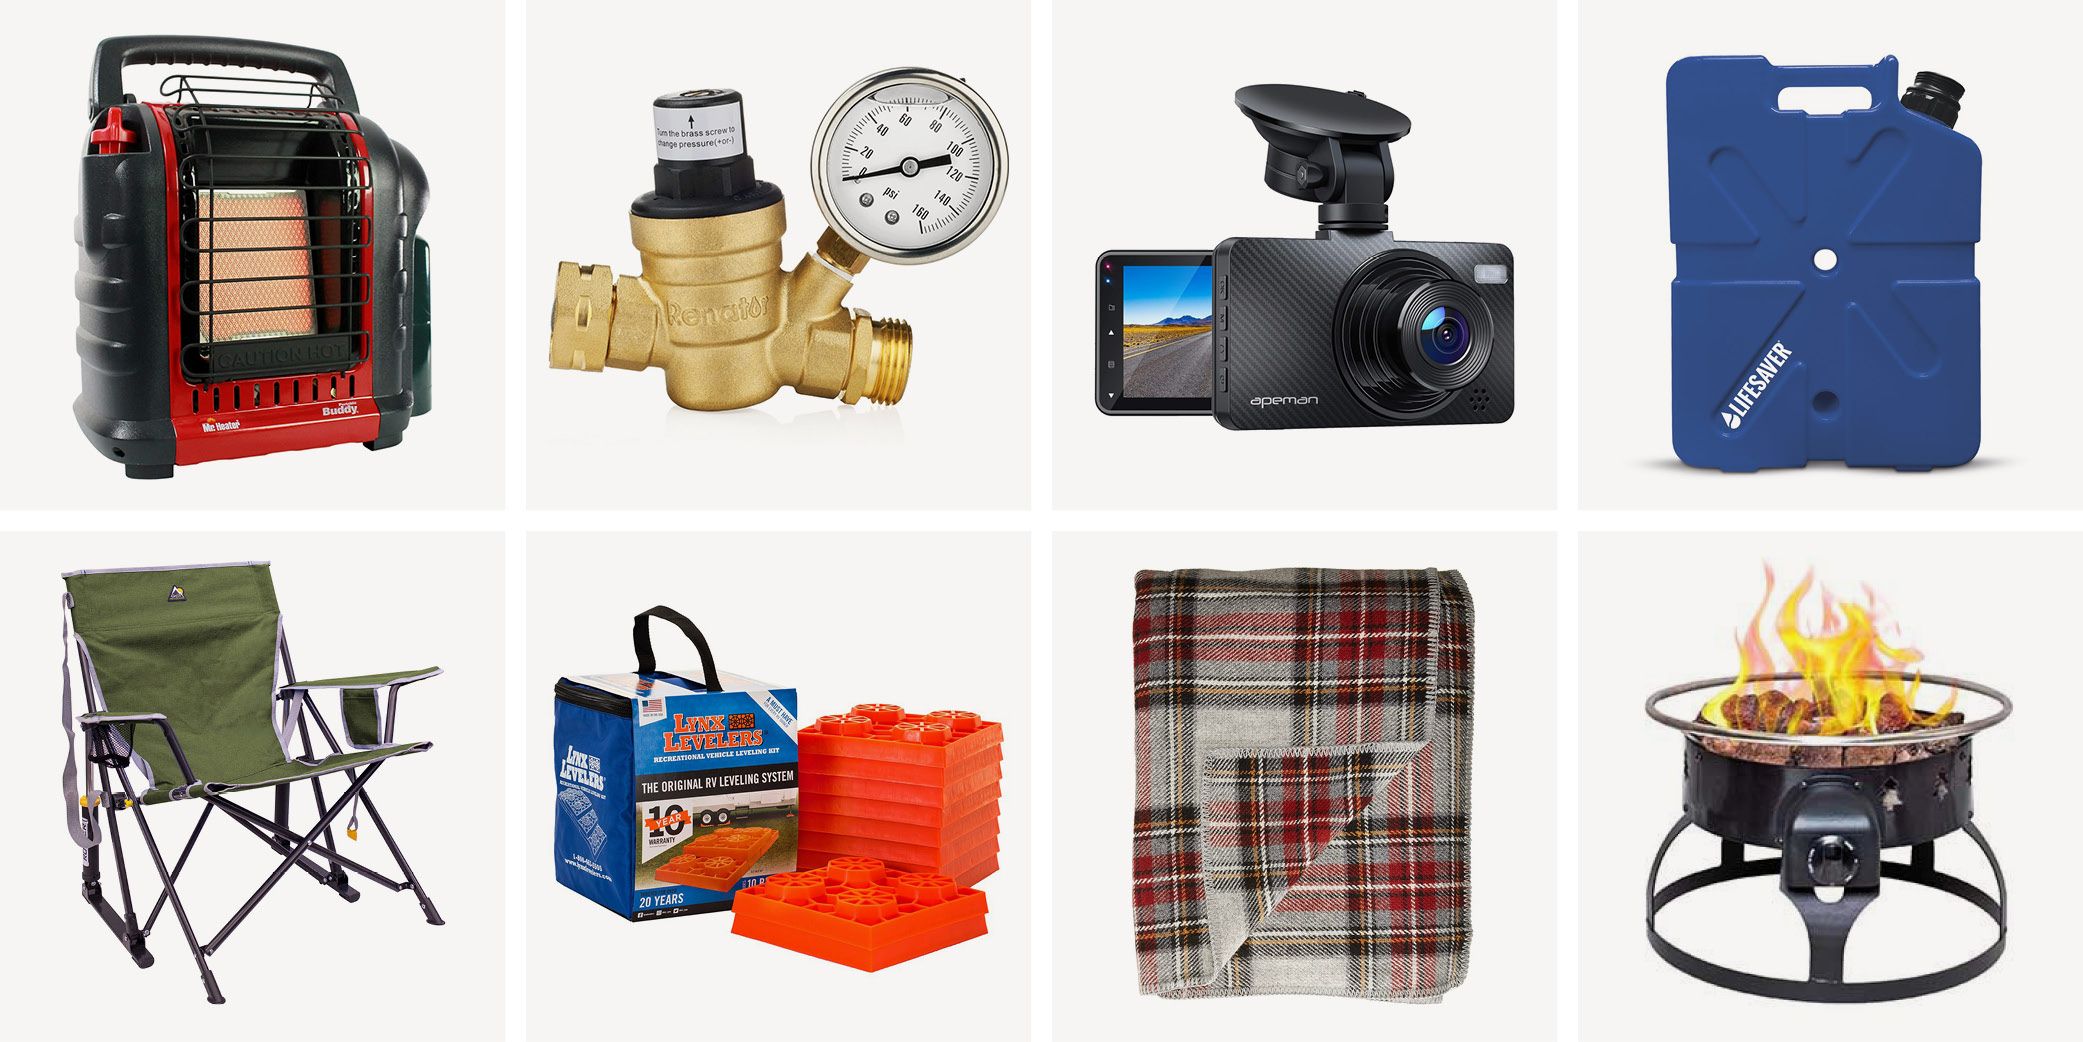 RV Accessories | Camping Accessories for Trailers and RVs